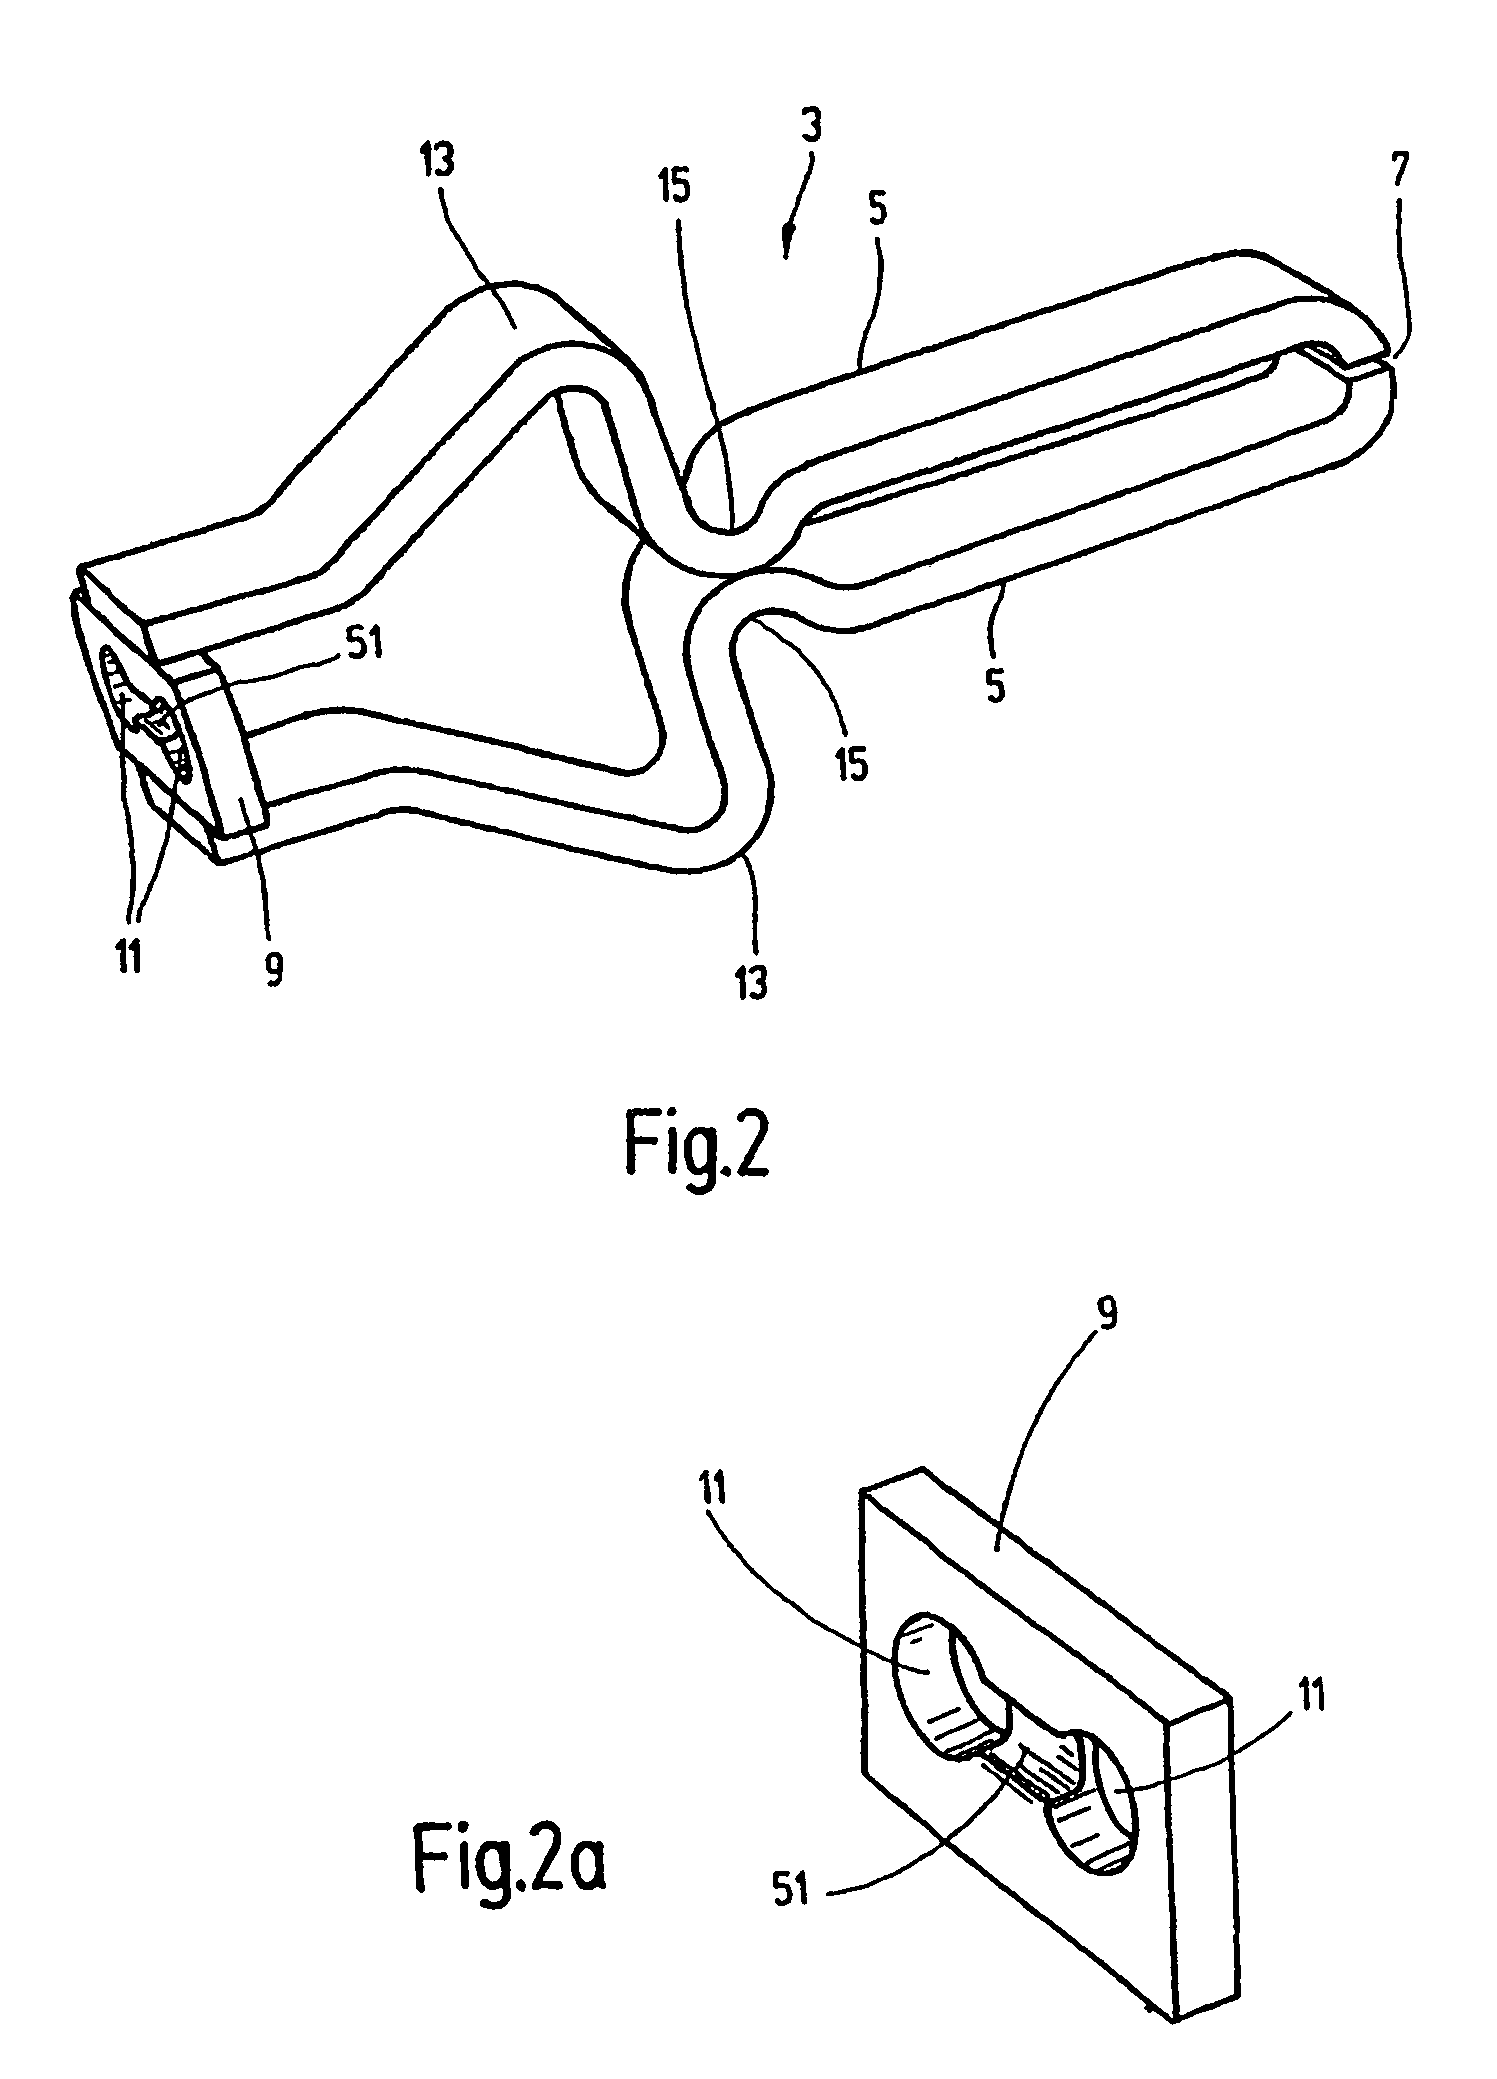 Method and device for the endoscopic application of self-closing medical clips